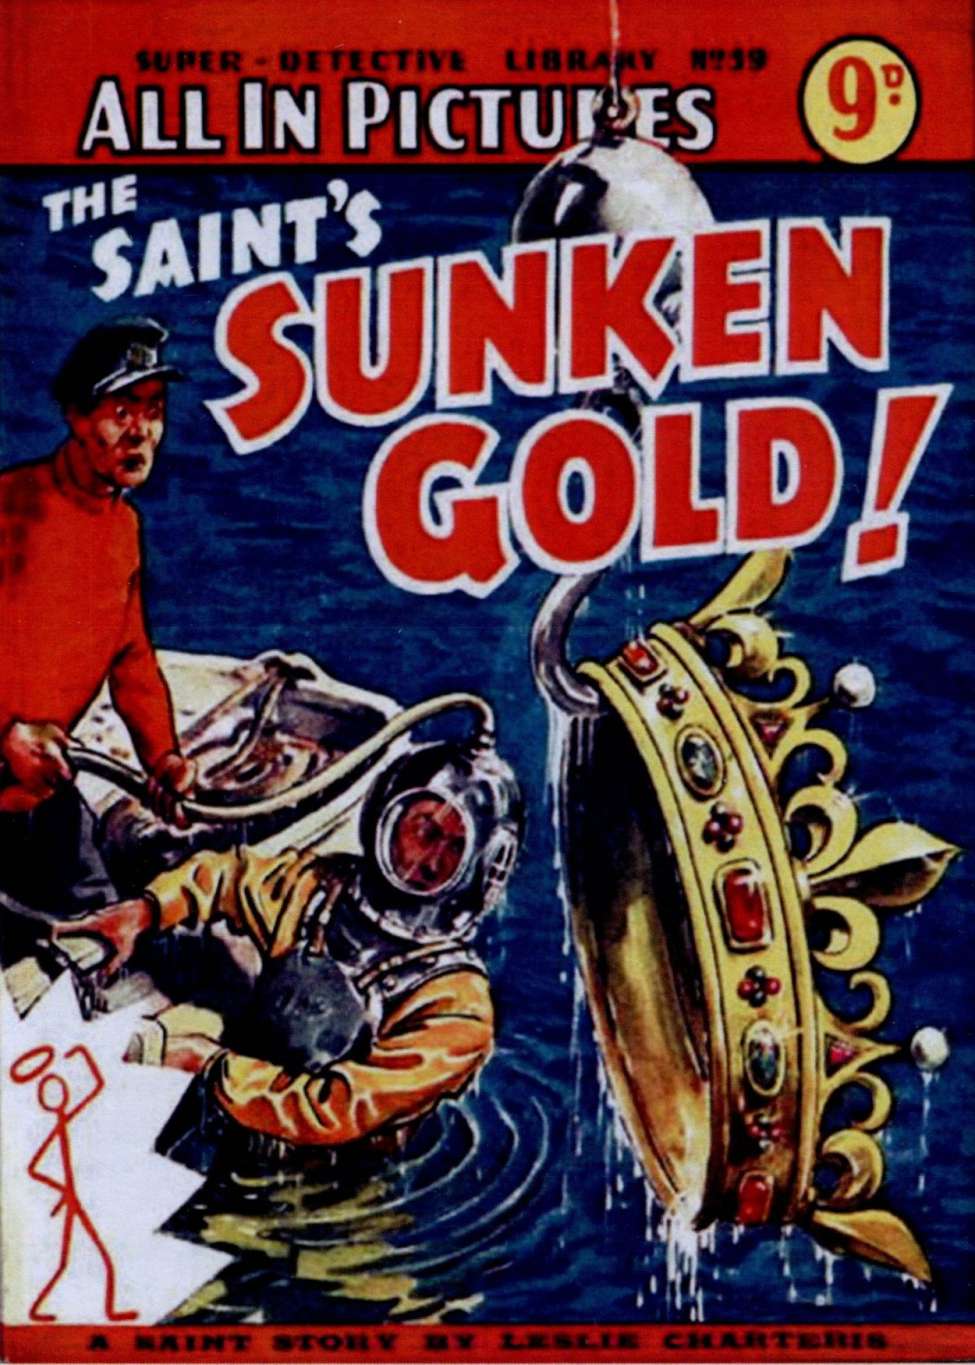 Comic Book Cover For Super Detective Library 59 - The Saint's Sunken Gold!